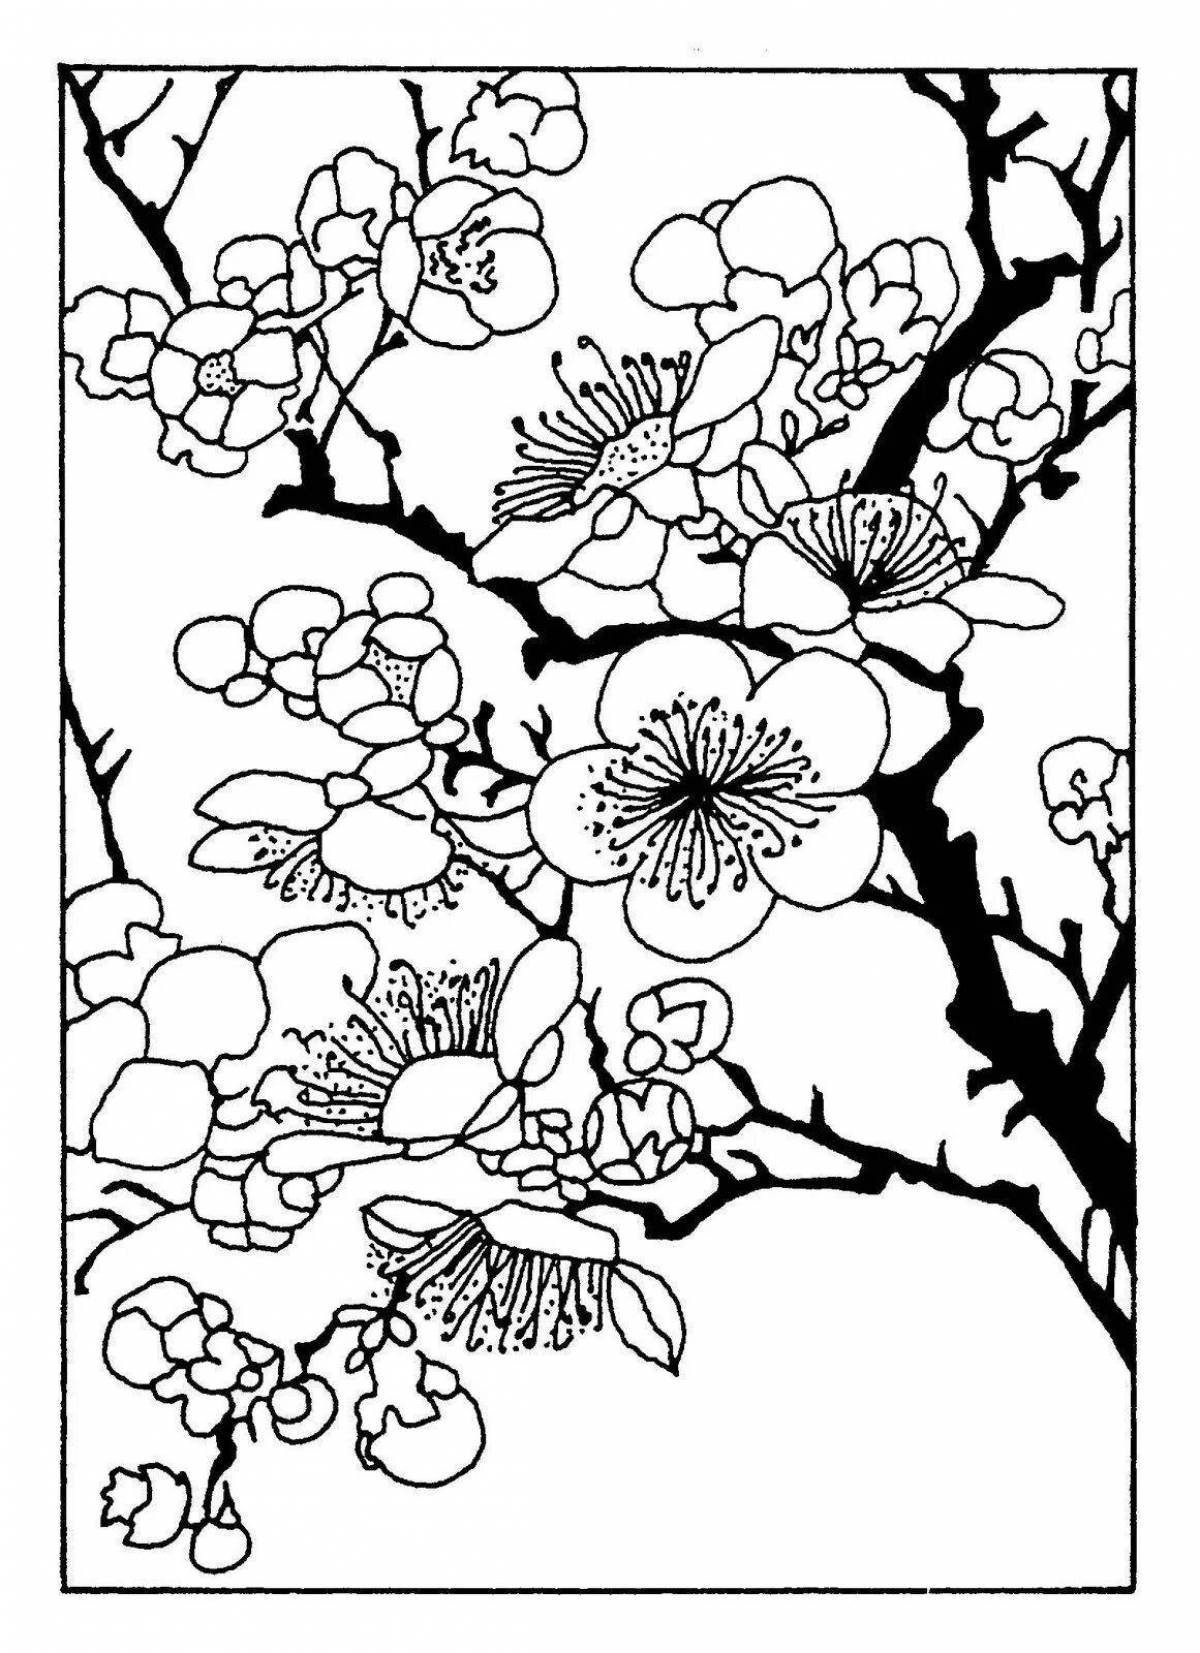 Attractive coloring book with Chinese motifs